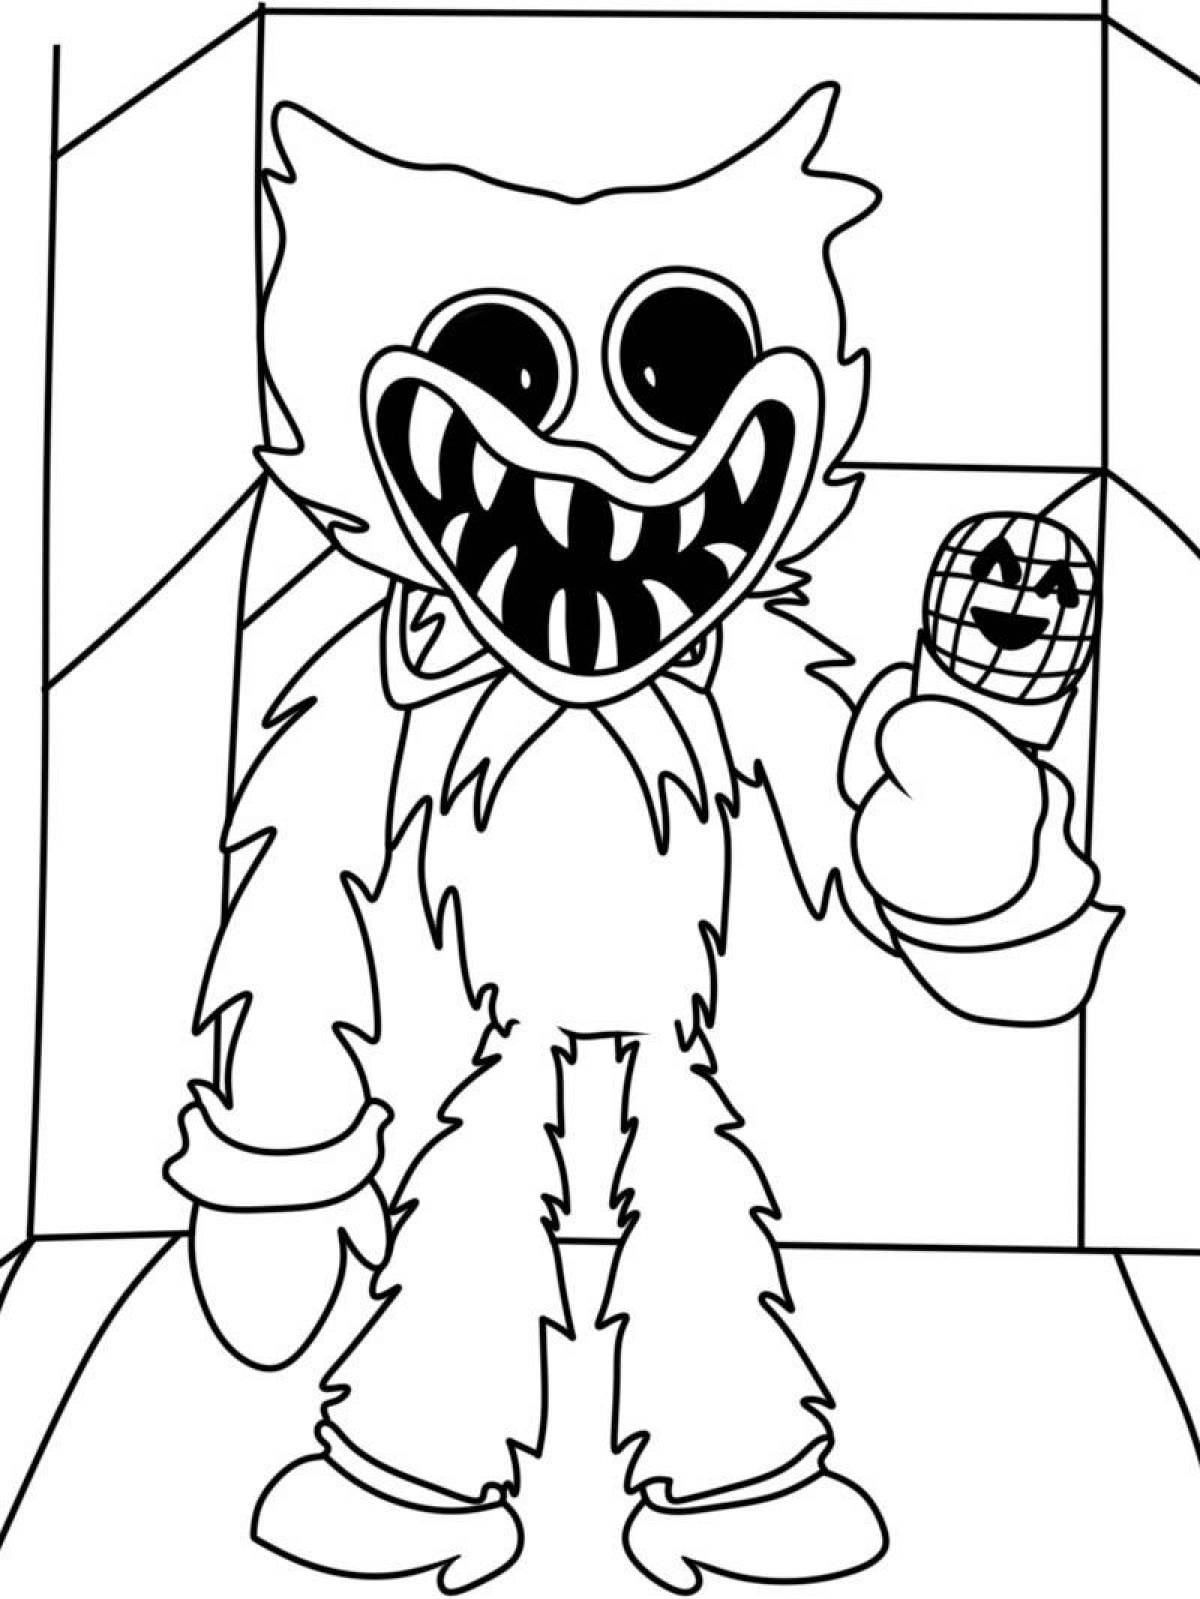 Huggy waggie incredible coloring book